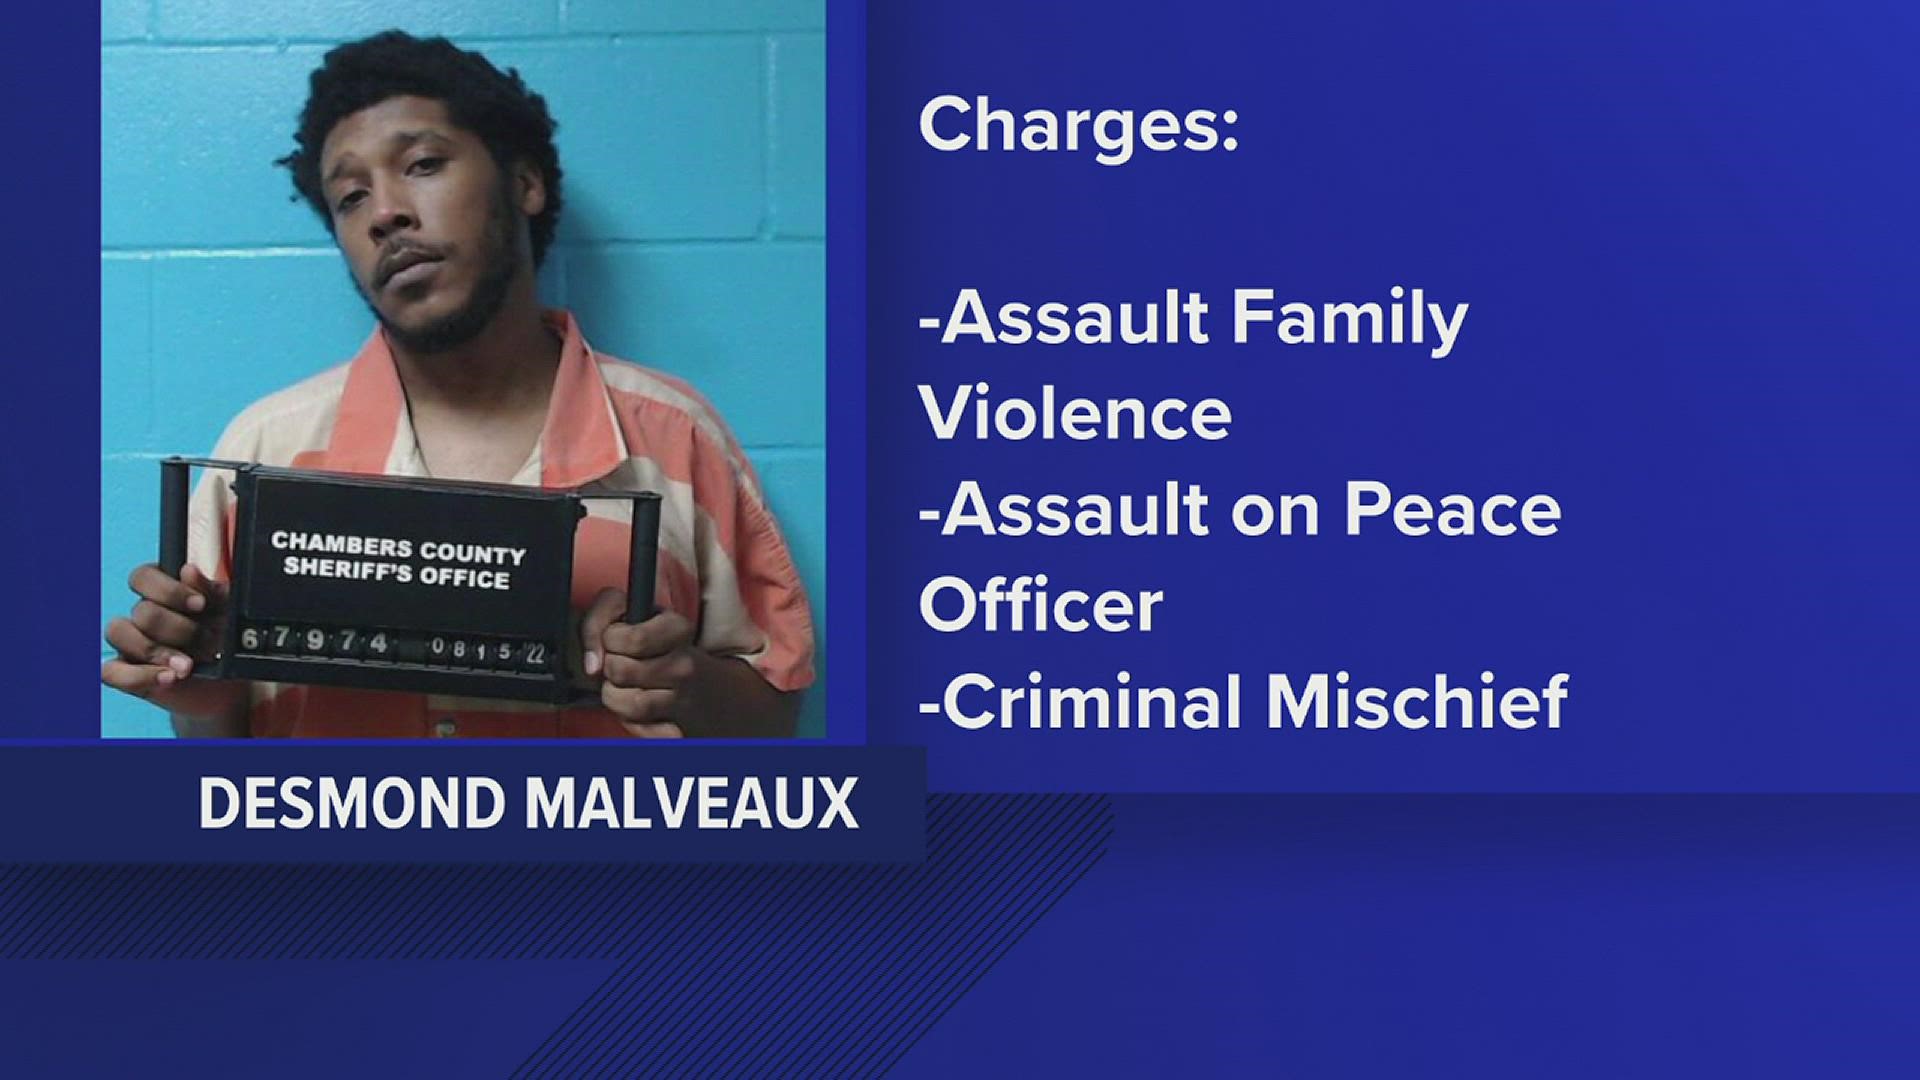 Desmond Malveaux is currently being held in the Chambers County Jail on bonds totaling more than  $100,000.